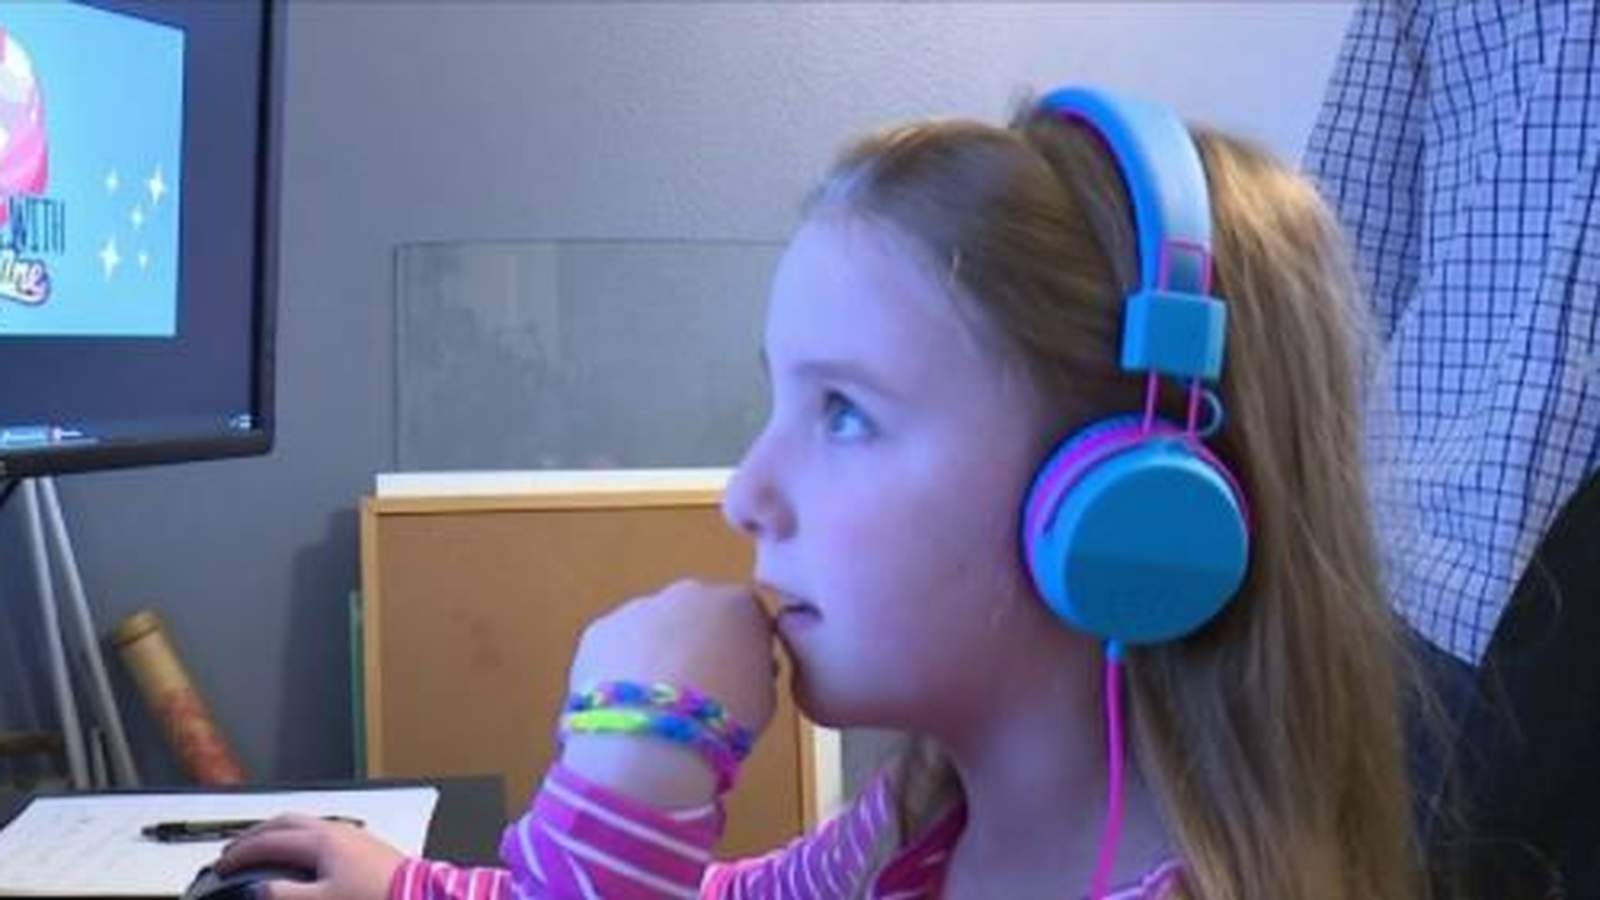 8-year-old starts Youtube channel to help kids learn computer skills